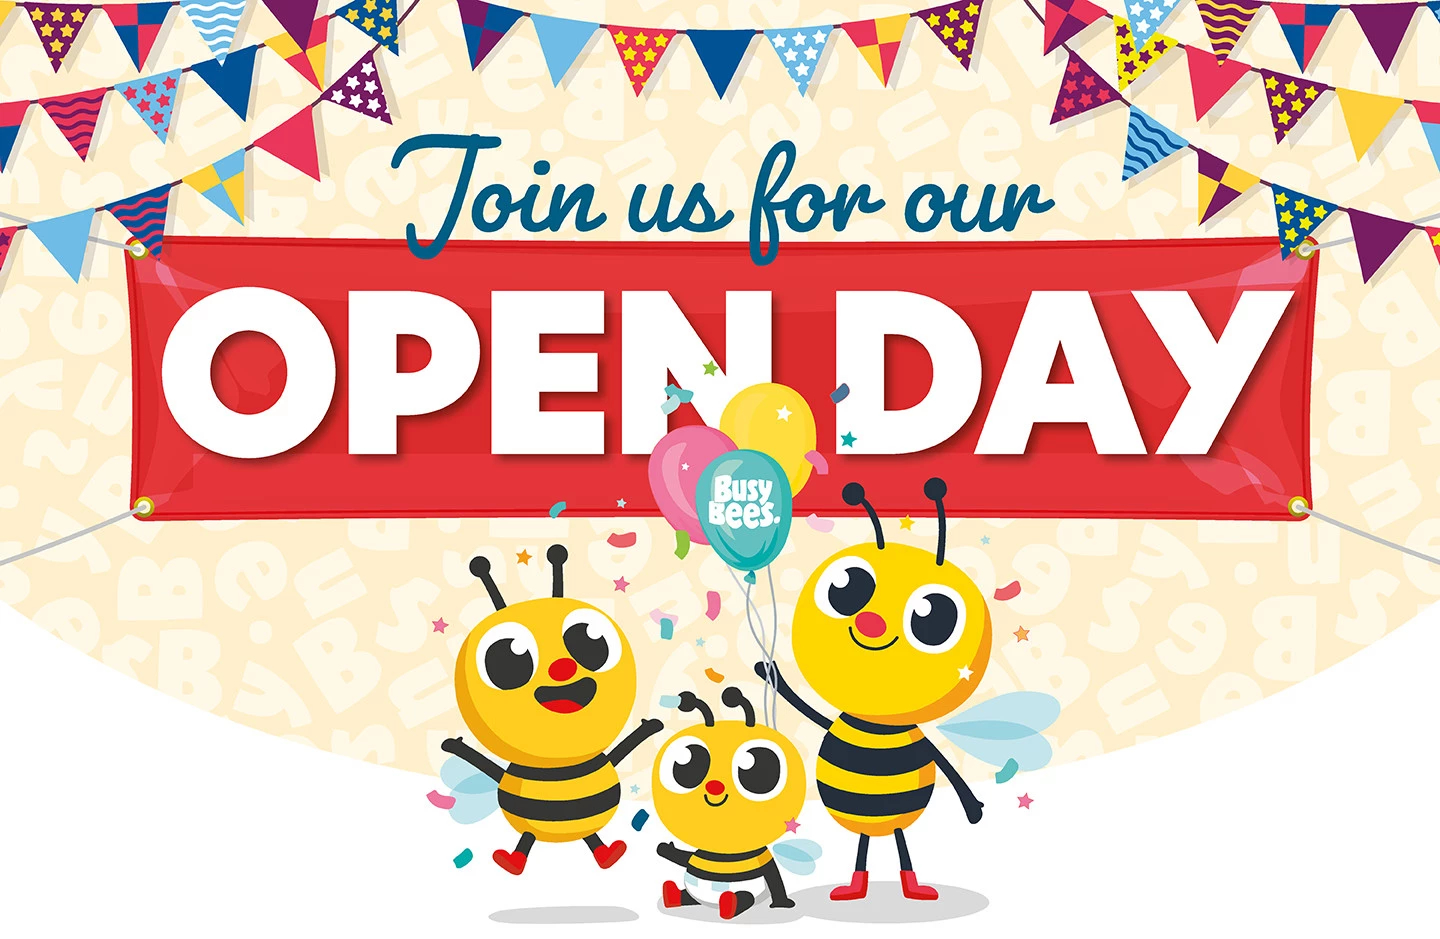 Join us for our open day